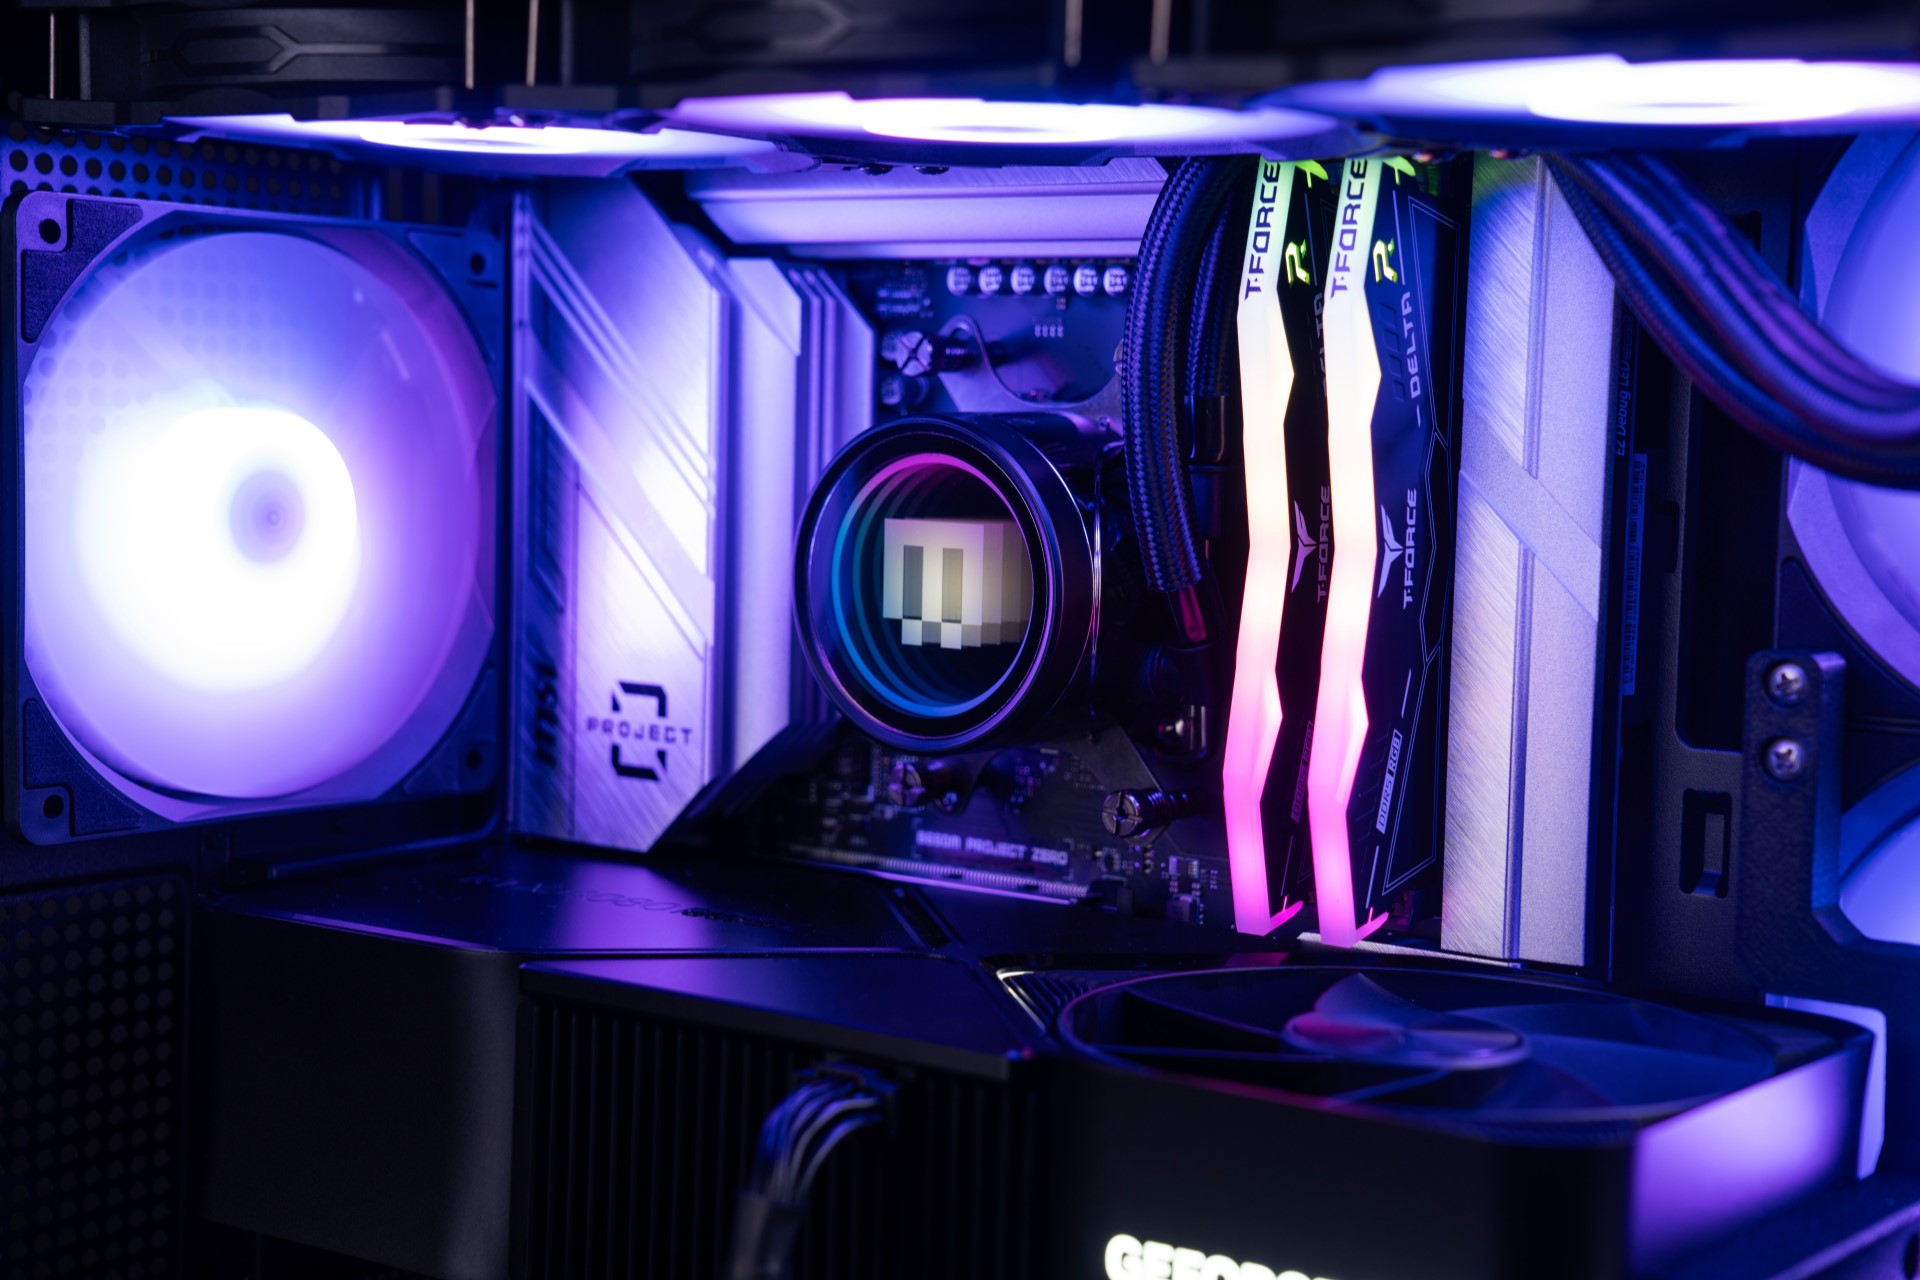 Maingear’s Zero Series desktops with hidden motherboard cables are now widely available — prebuilts with MG-RC start at $1,399